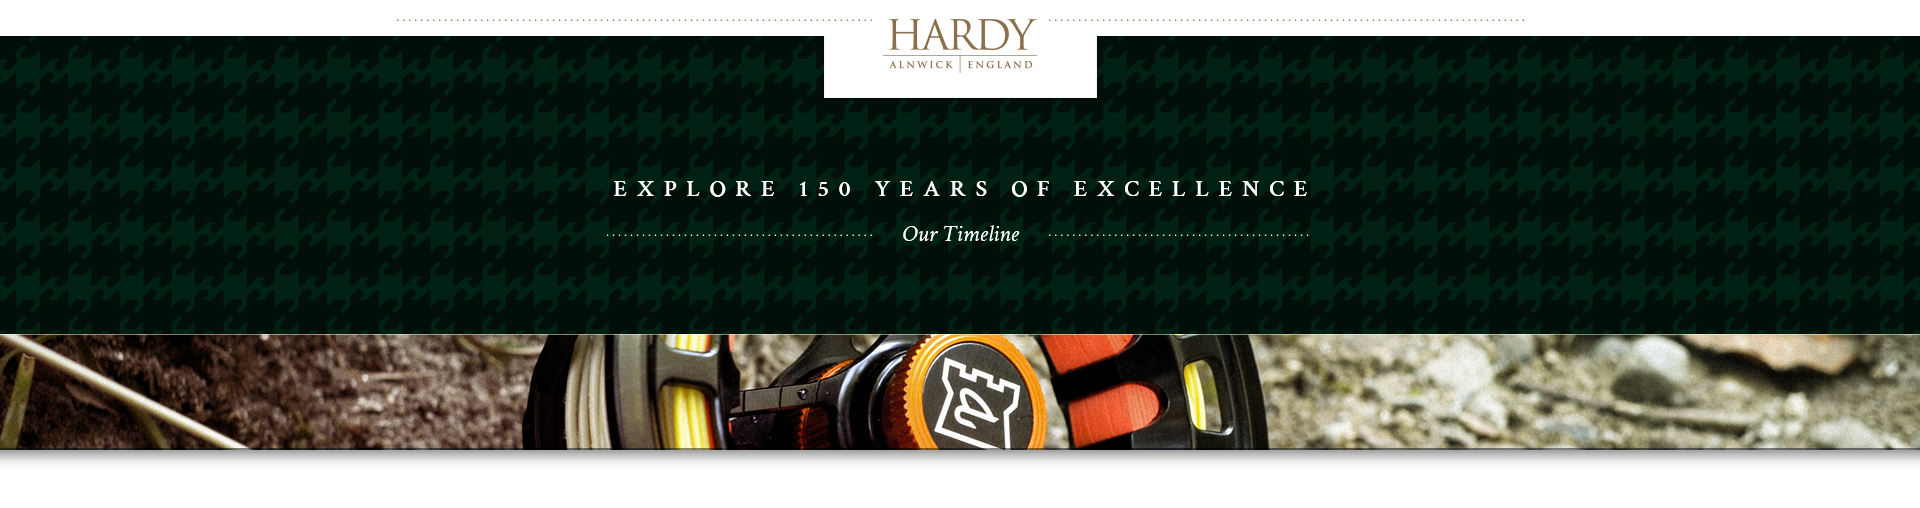 Explore 150 Years of Excellence: Our Timeline